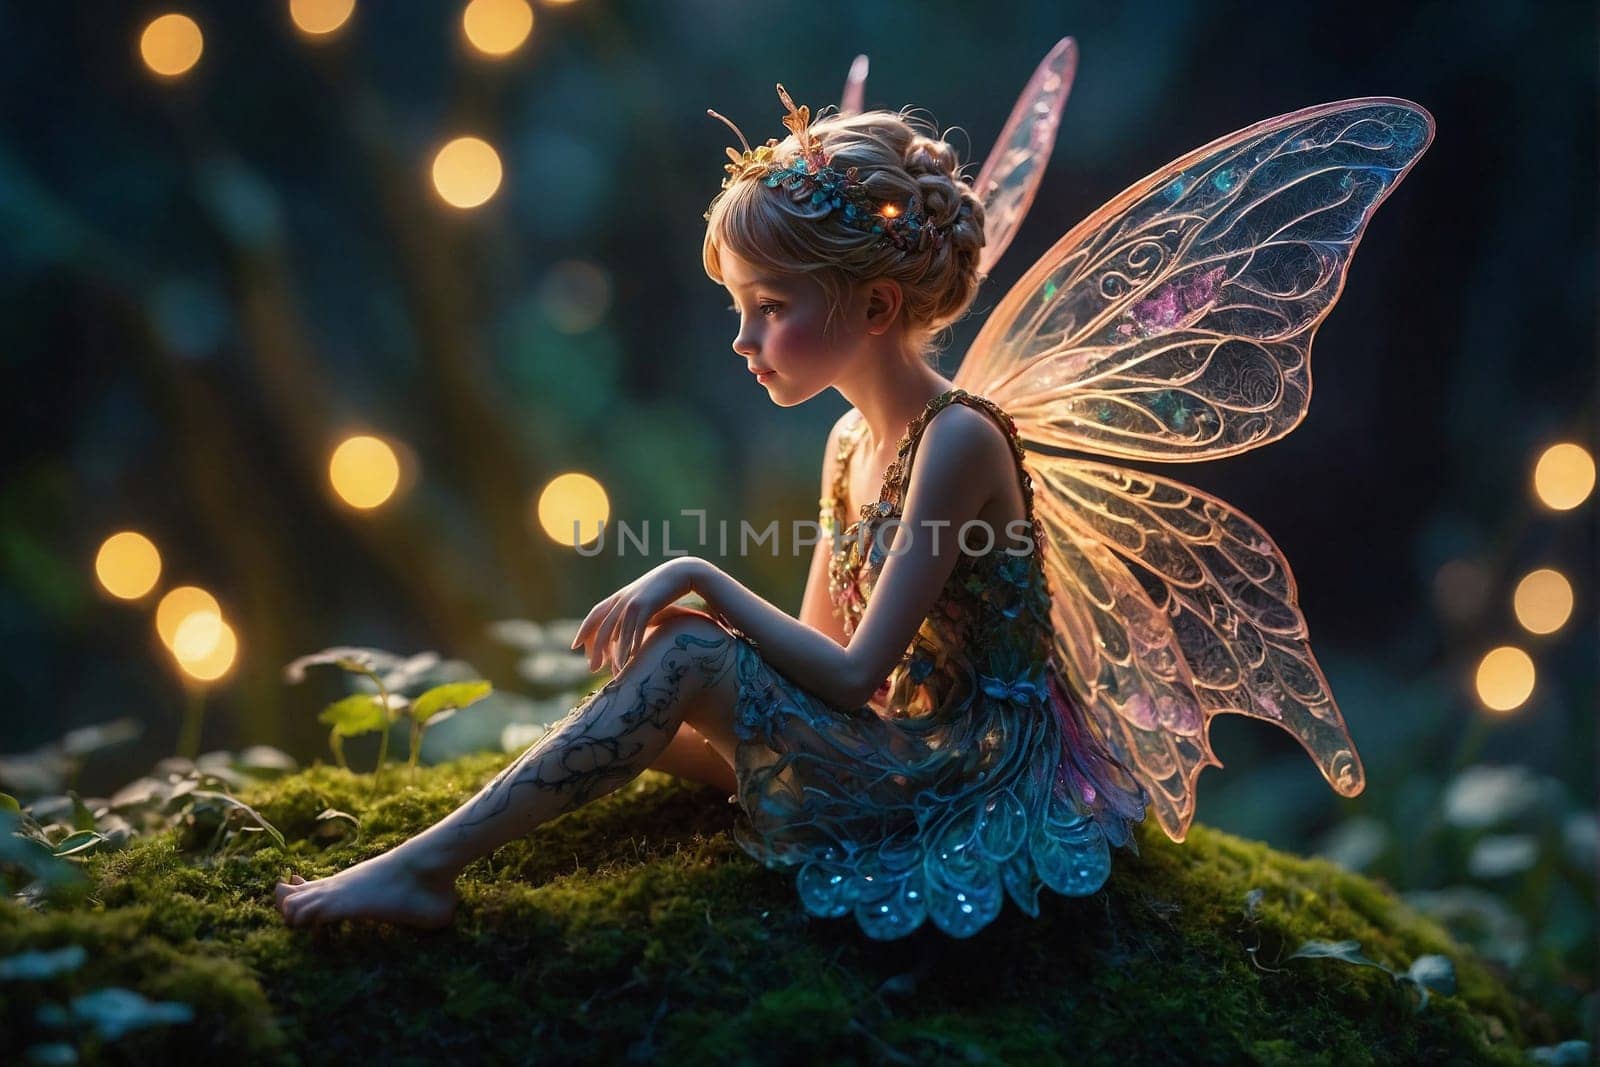 A fairy sitting on a mossy surface is surrounded by the soft glow of fairy lights in the background.